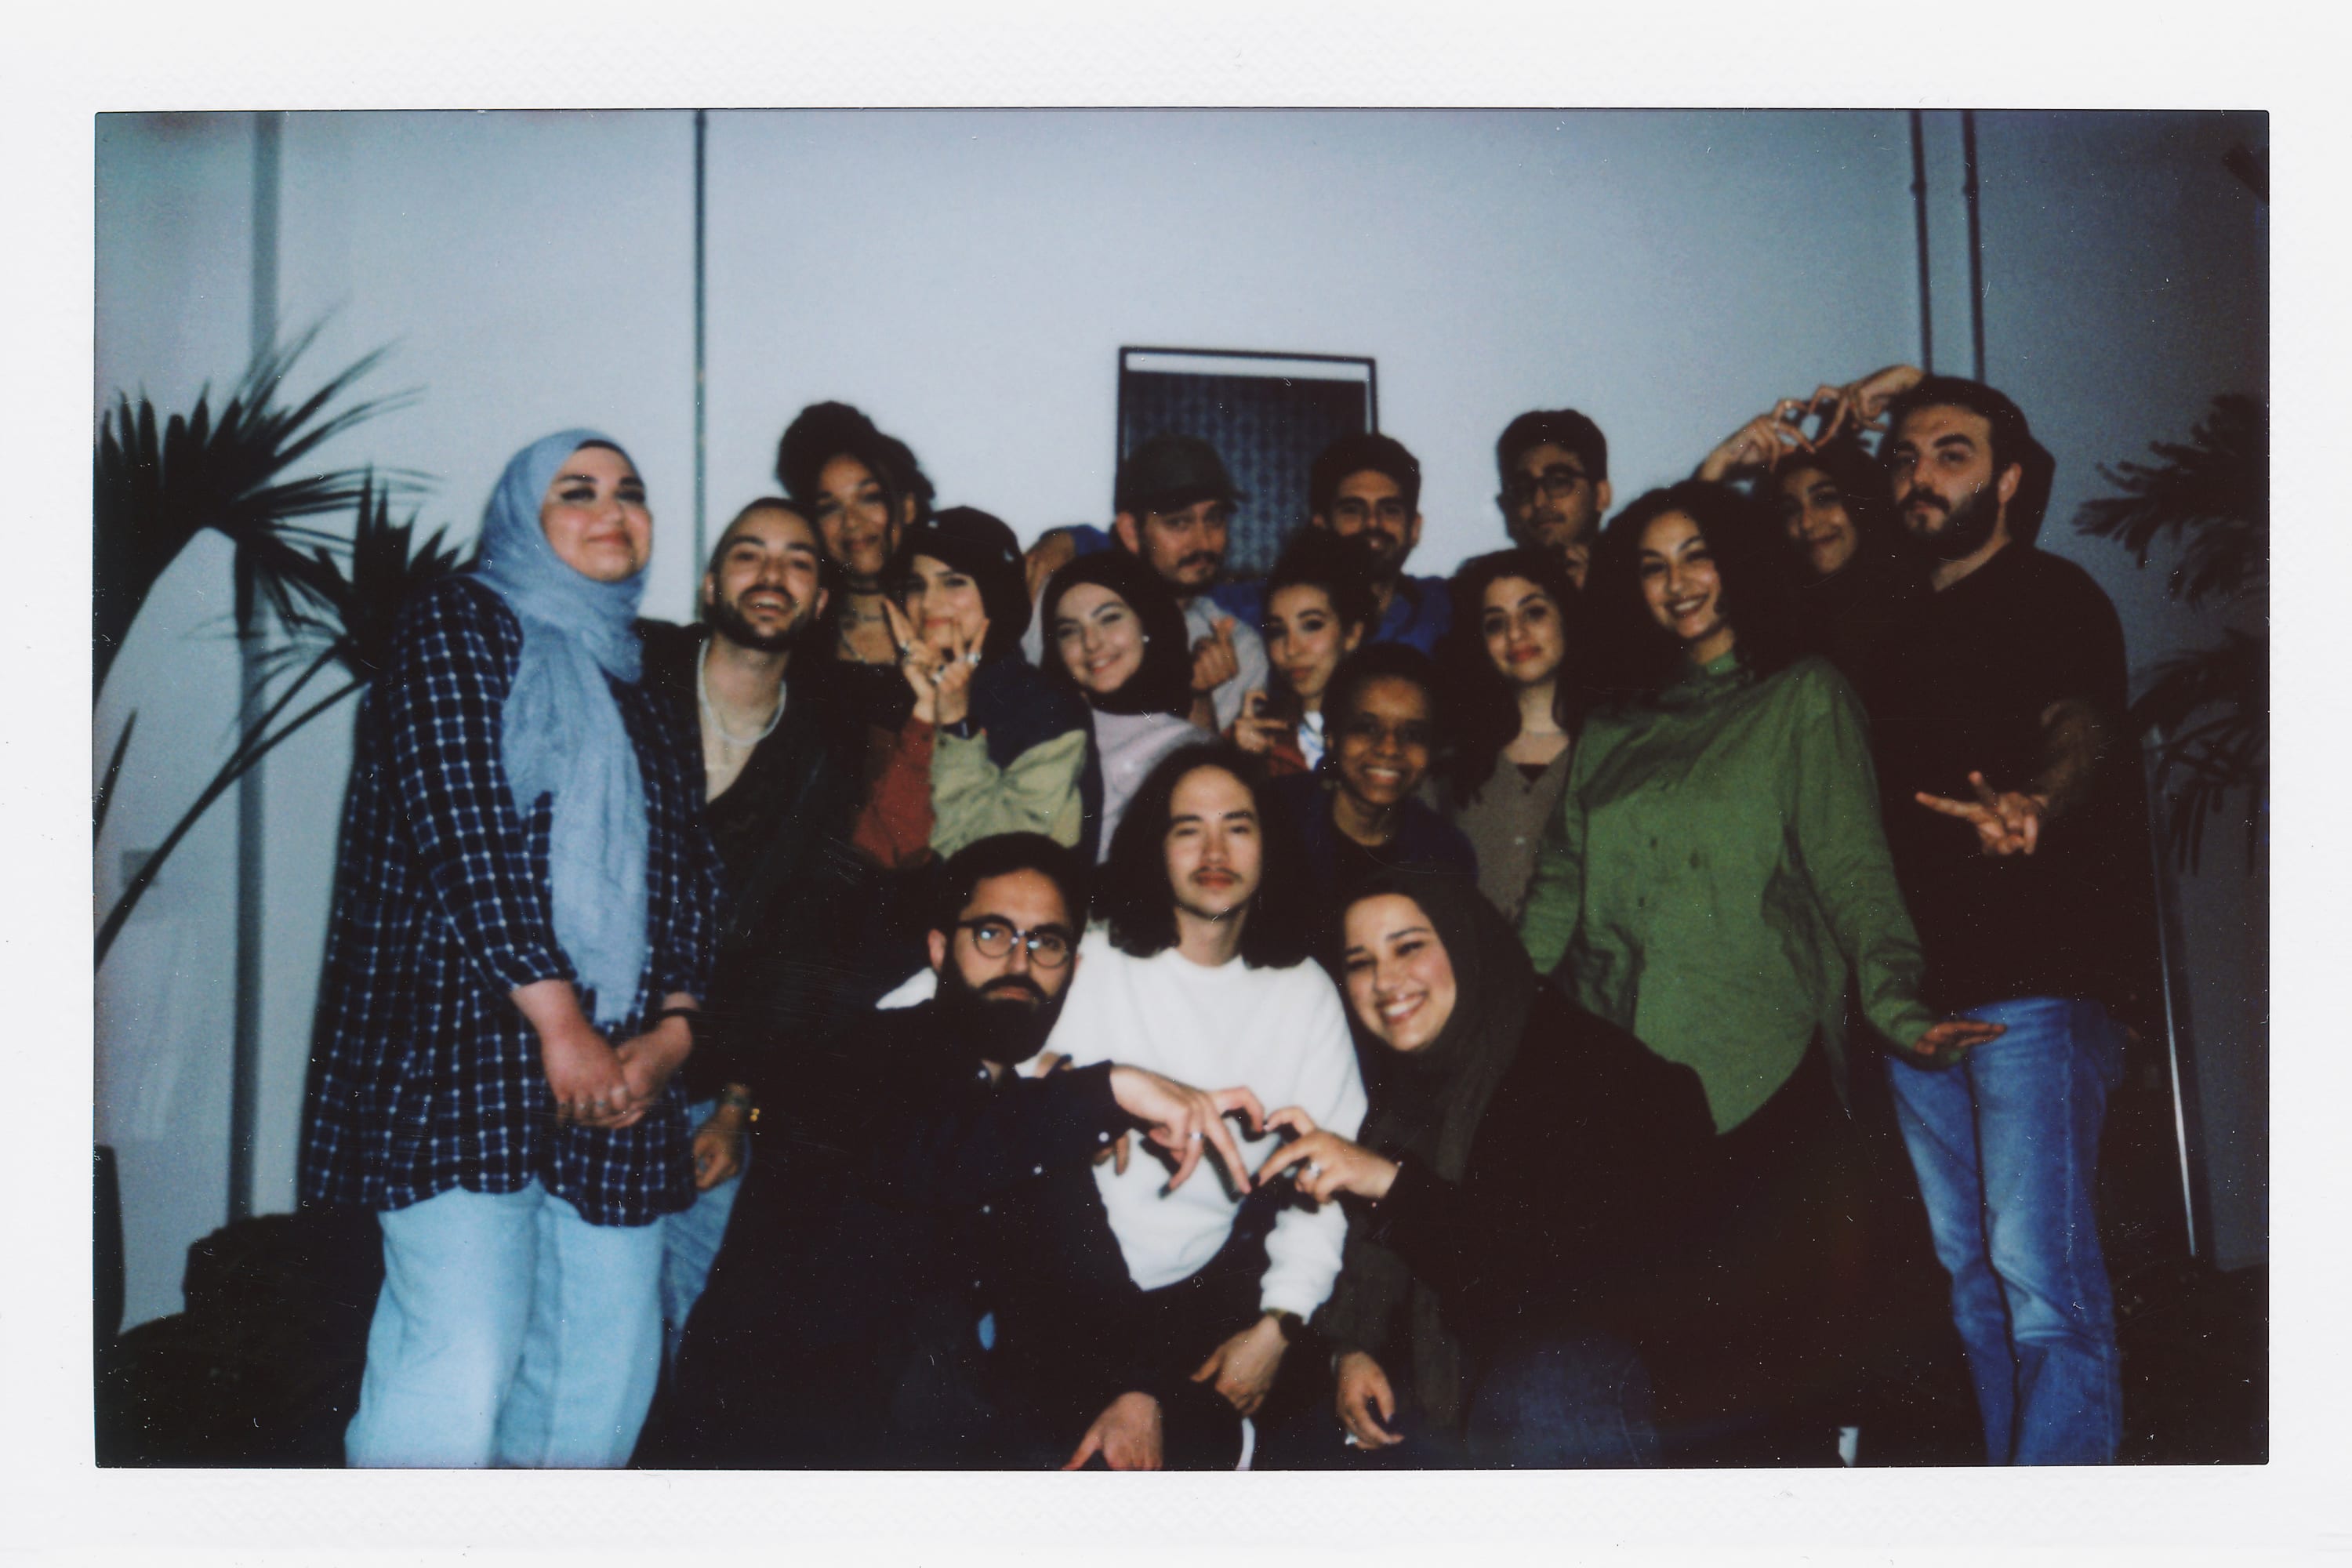 Polaroid picture of group of people